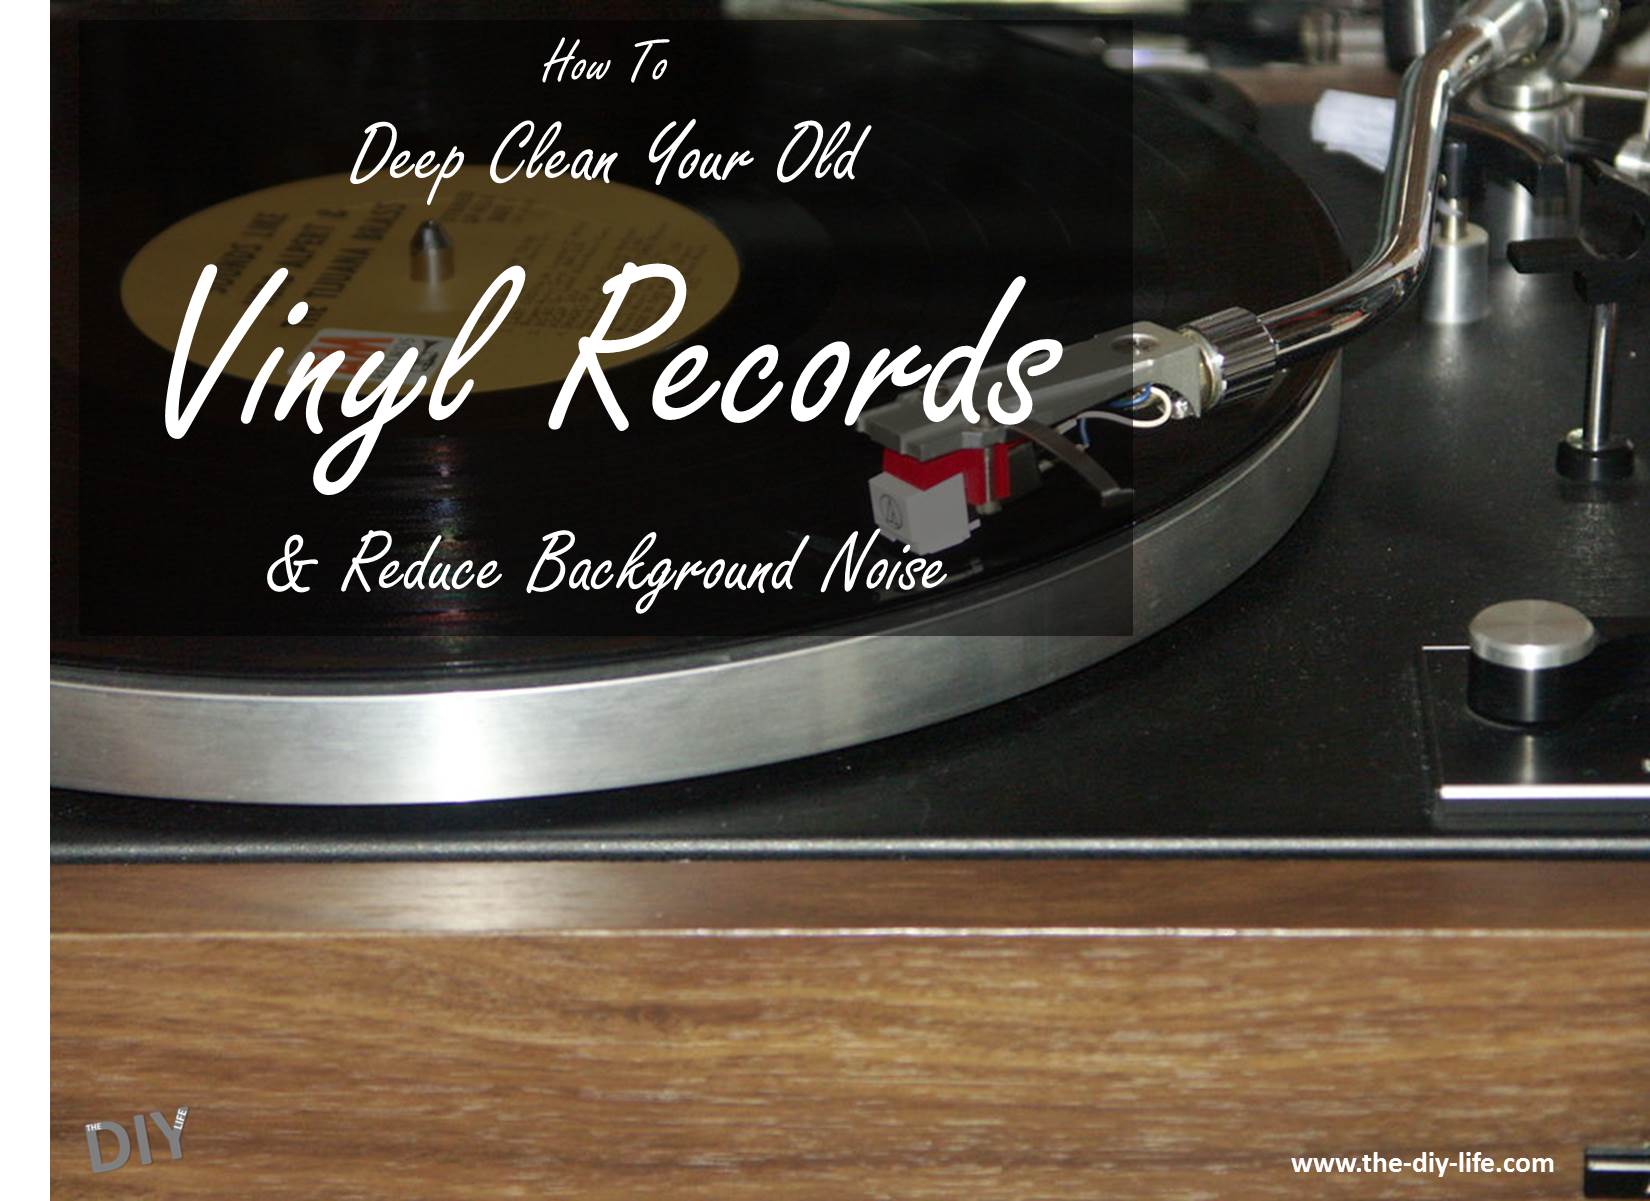 How to deep clean your old vinyl records and reduce background noise